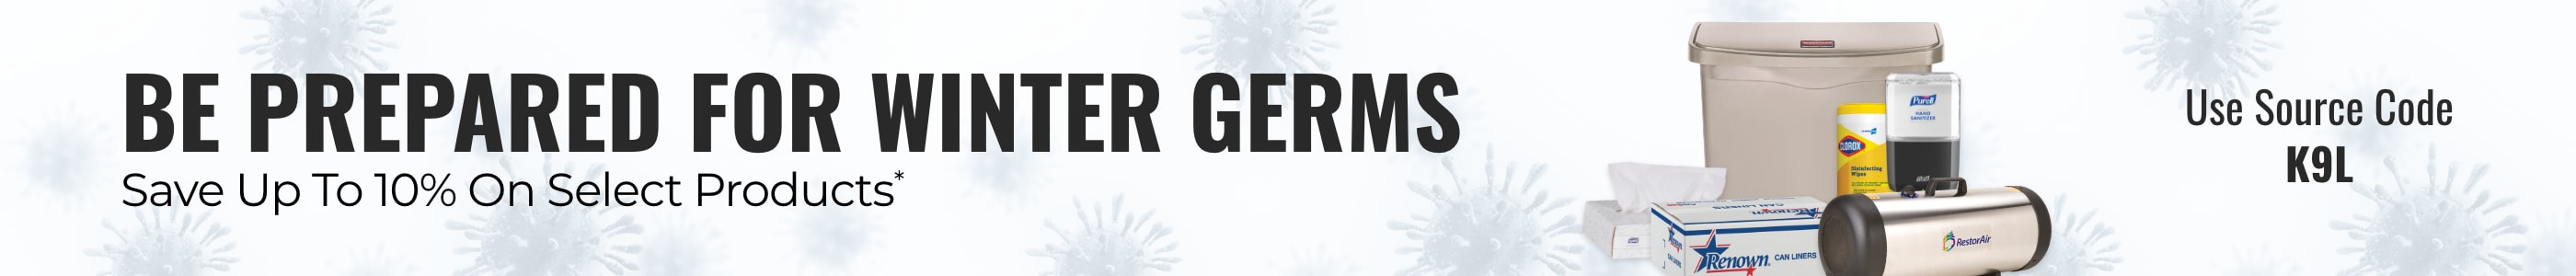 Be Prepared For Winter Germs And Save Up To 10% On Select Products